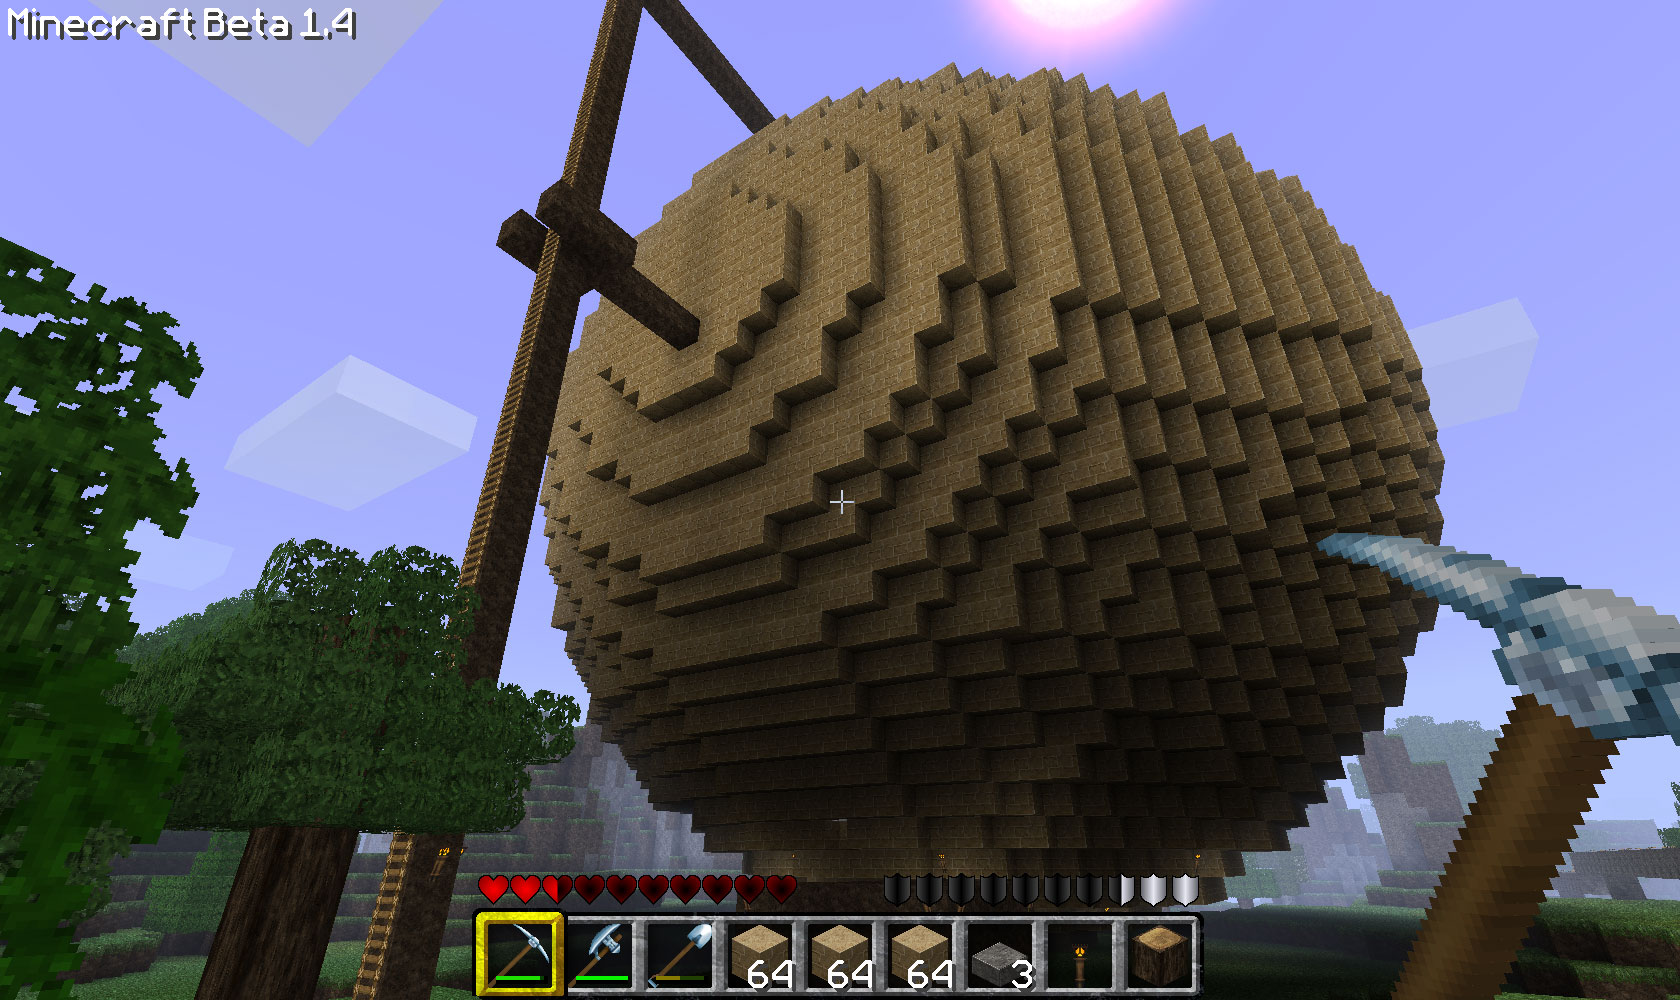 How to build a hollow sphere in Minecraft